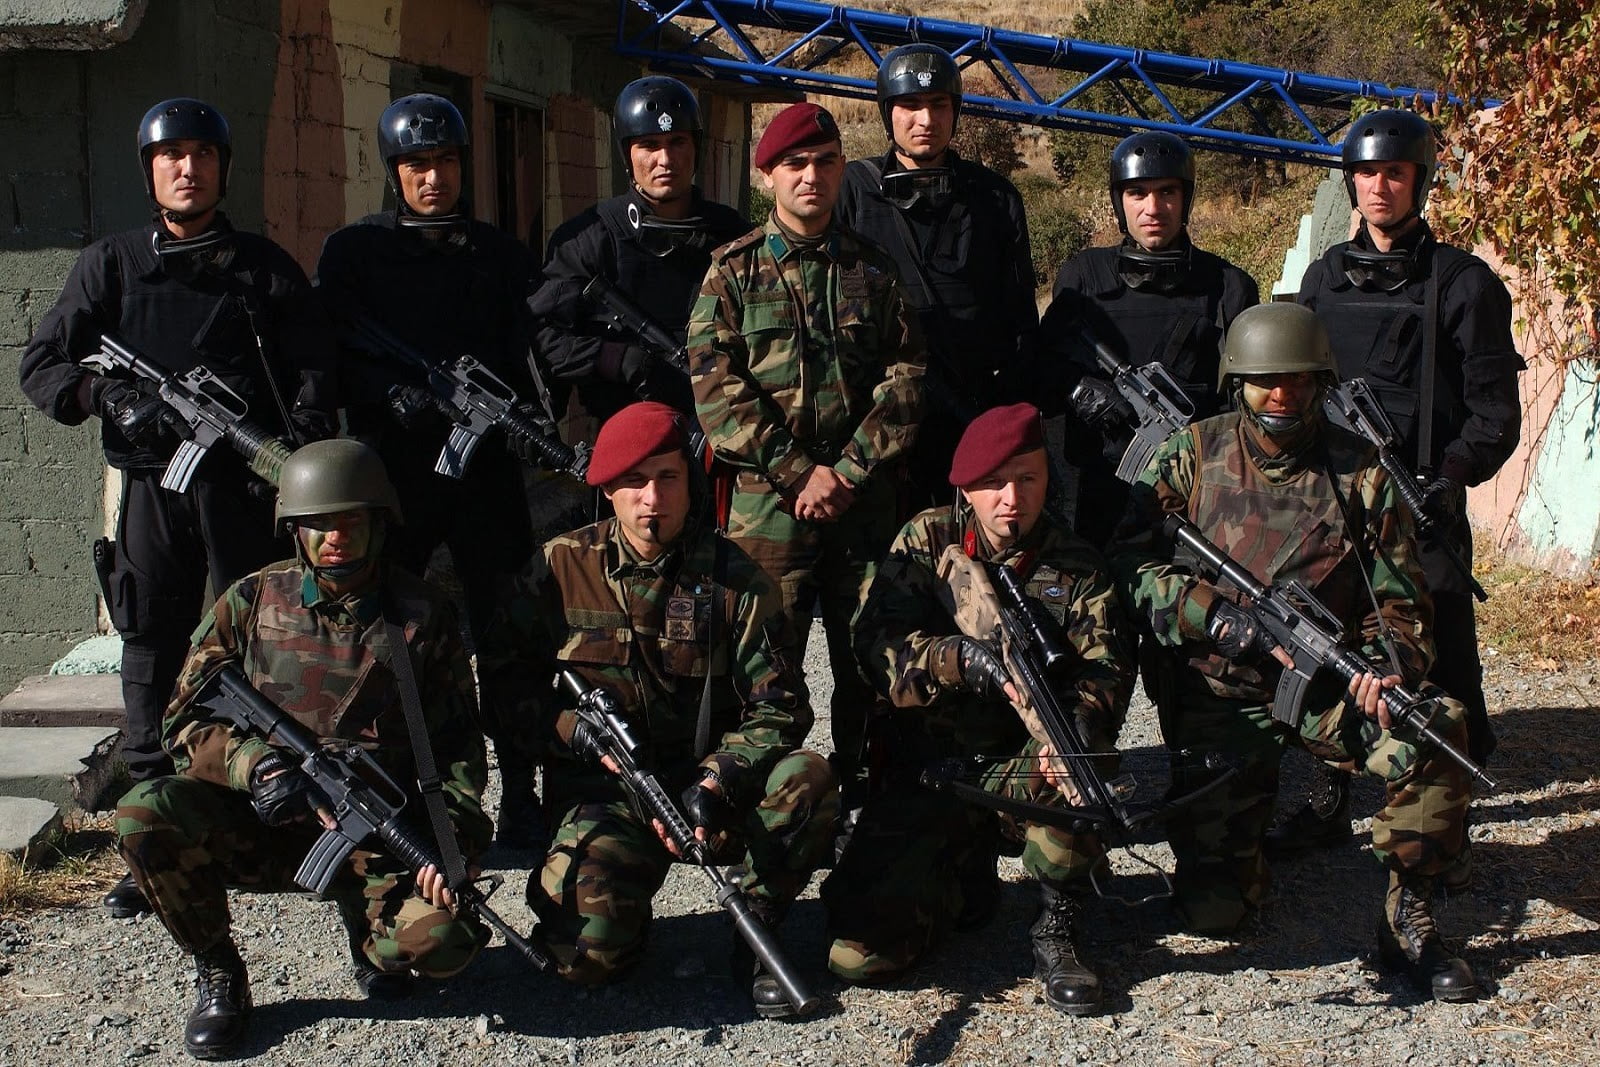 Turkish Special Forces, Rescue Team, Maroon Berets, soldier